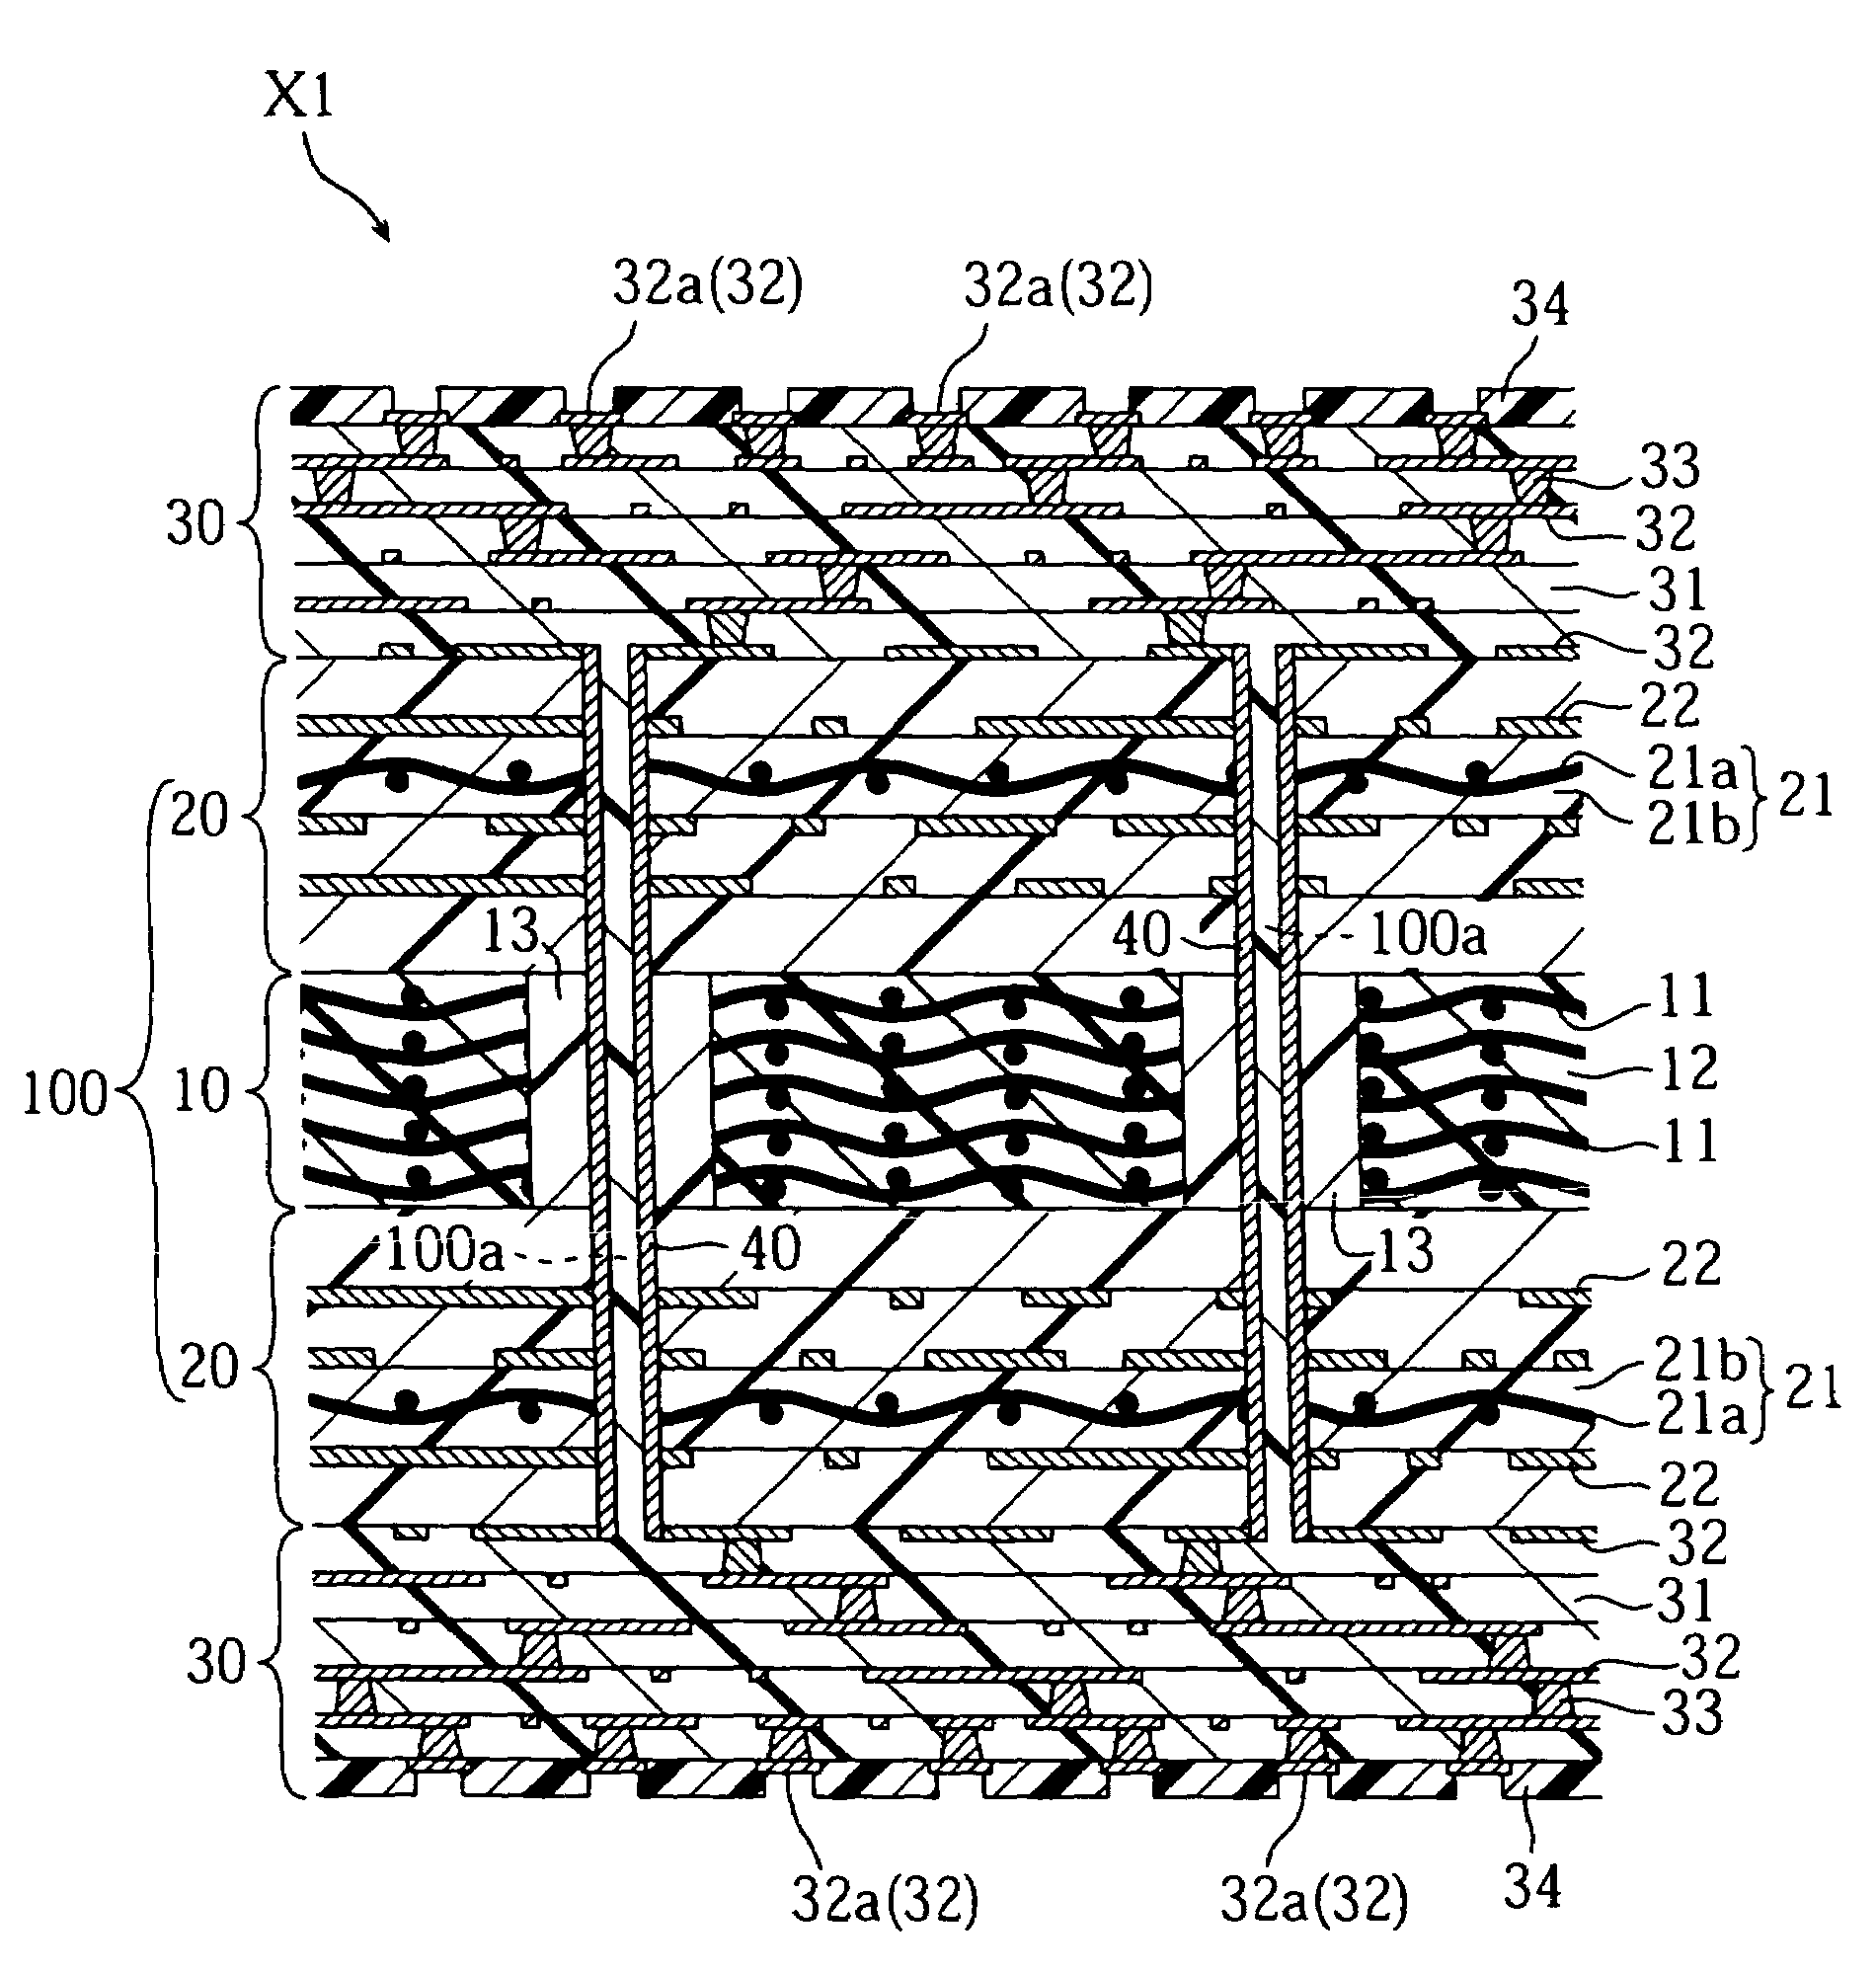 Multilayer wiring board incorporating carbon fibers and glass fibers